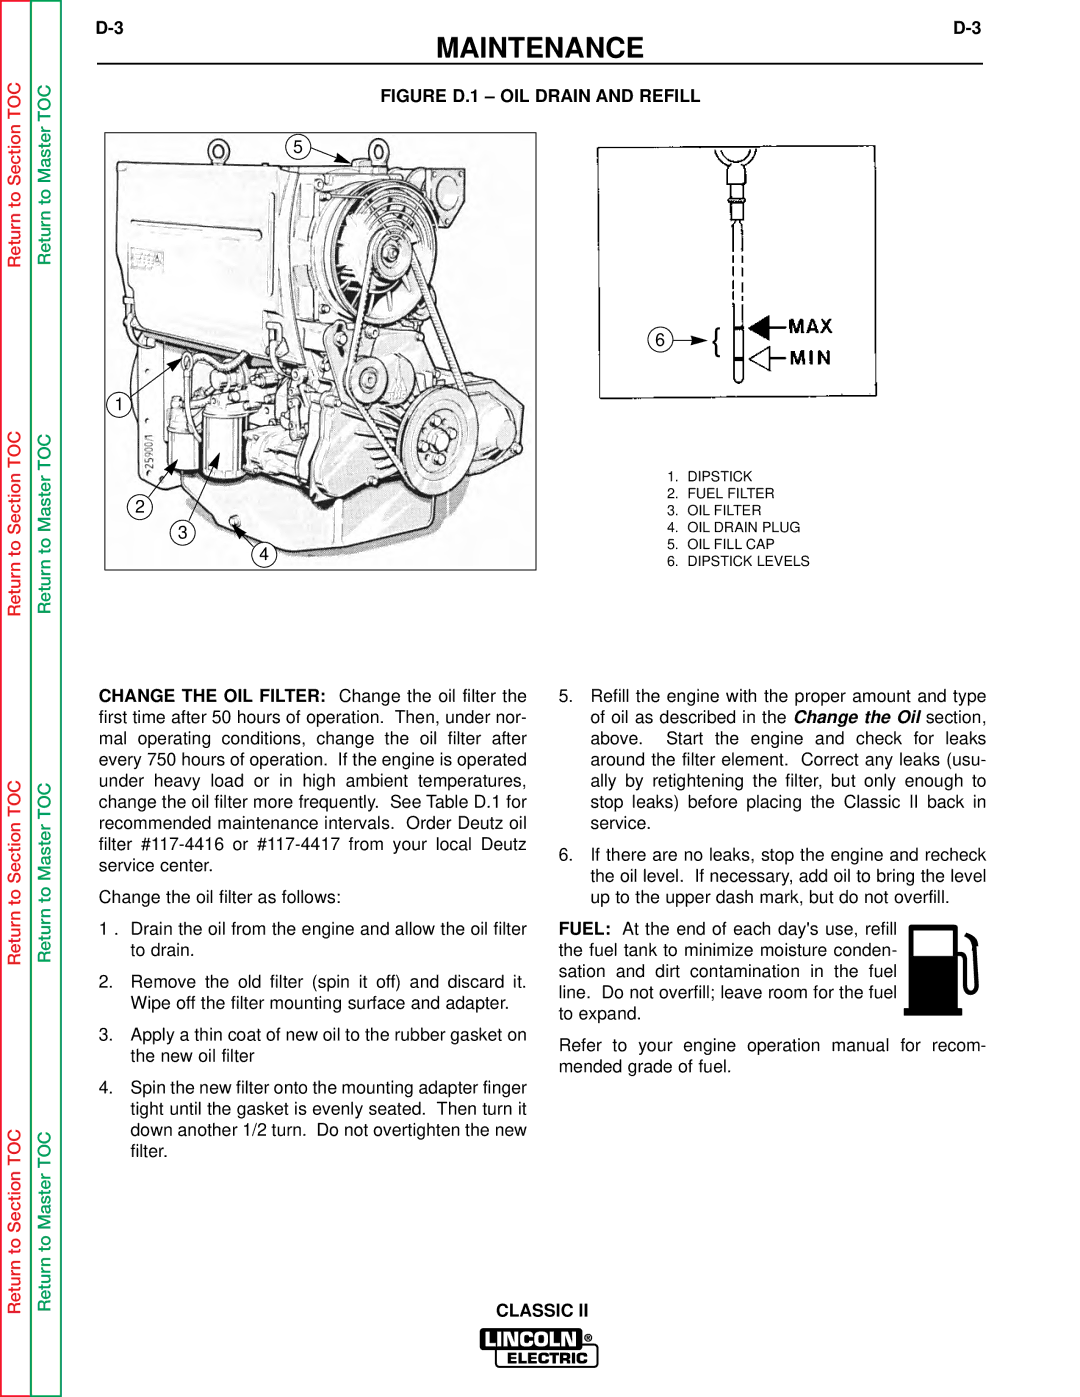 Lincoln Electric SVM125-A service manual Figure D.1 OIL Drain and Refill 